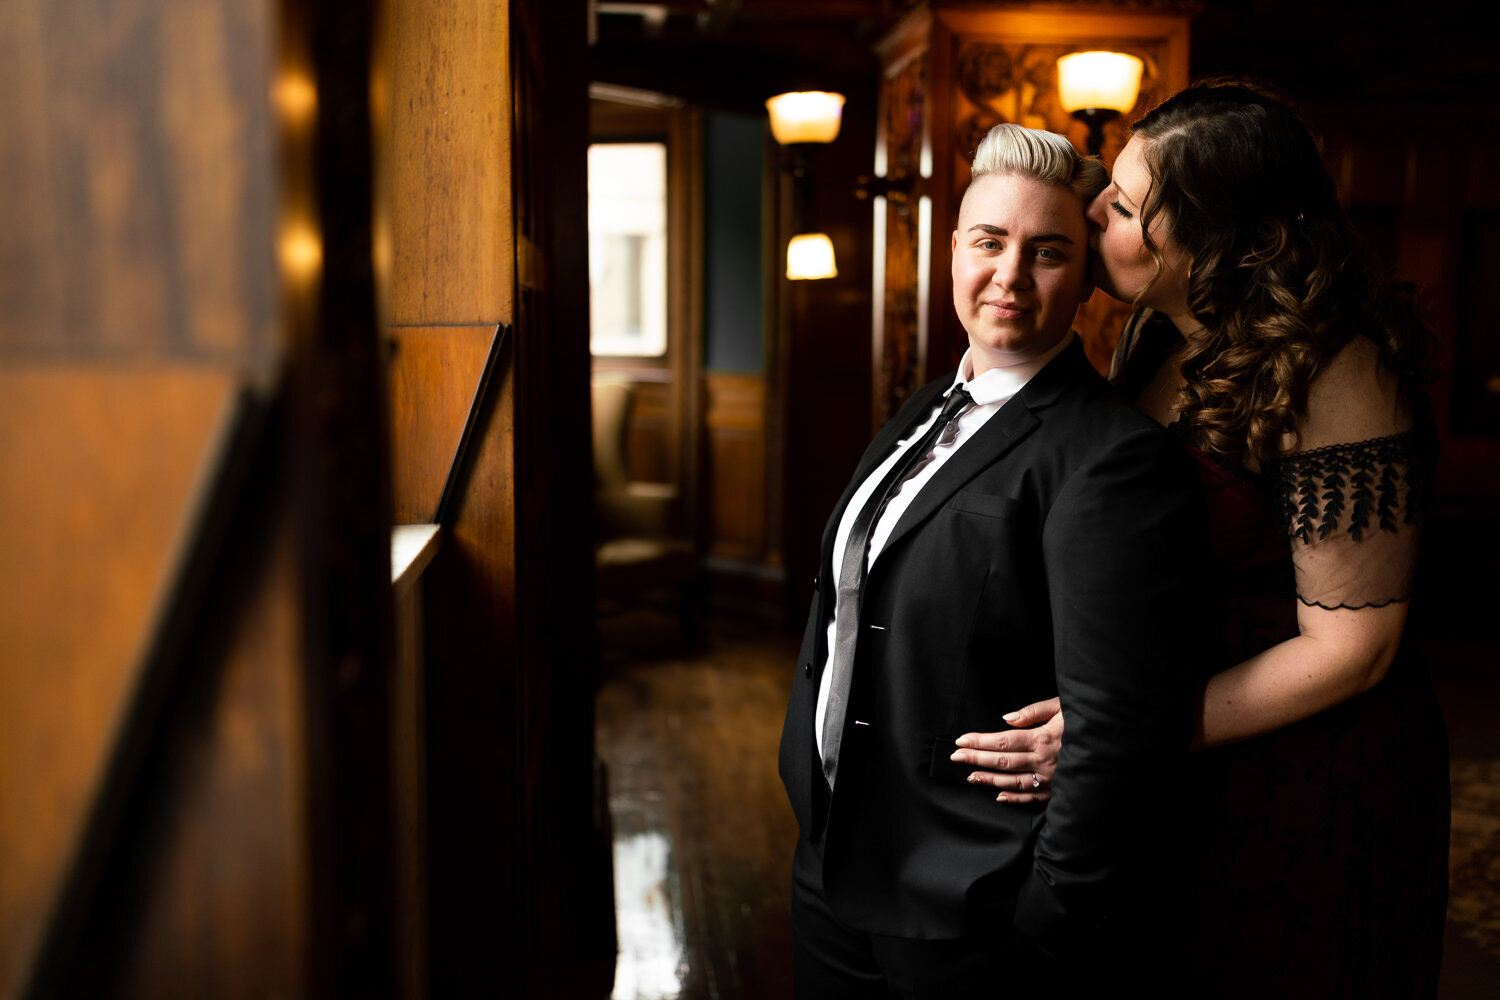 Woman kisses a woman in a suit in front of a window at the Landmark Center in Saint Paul, Minnesota.